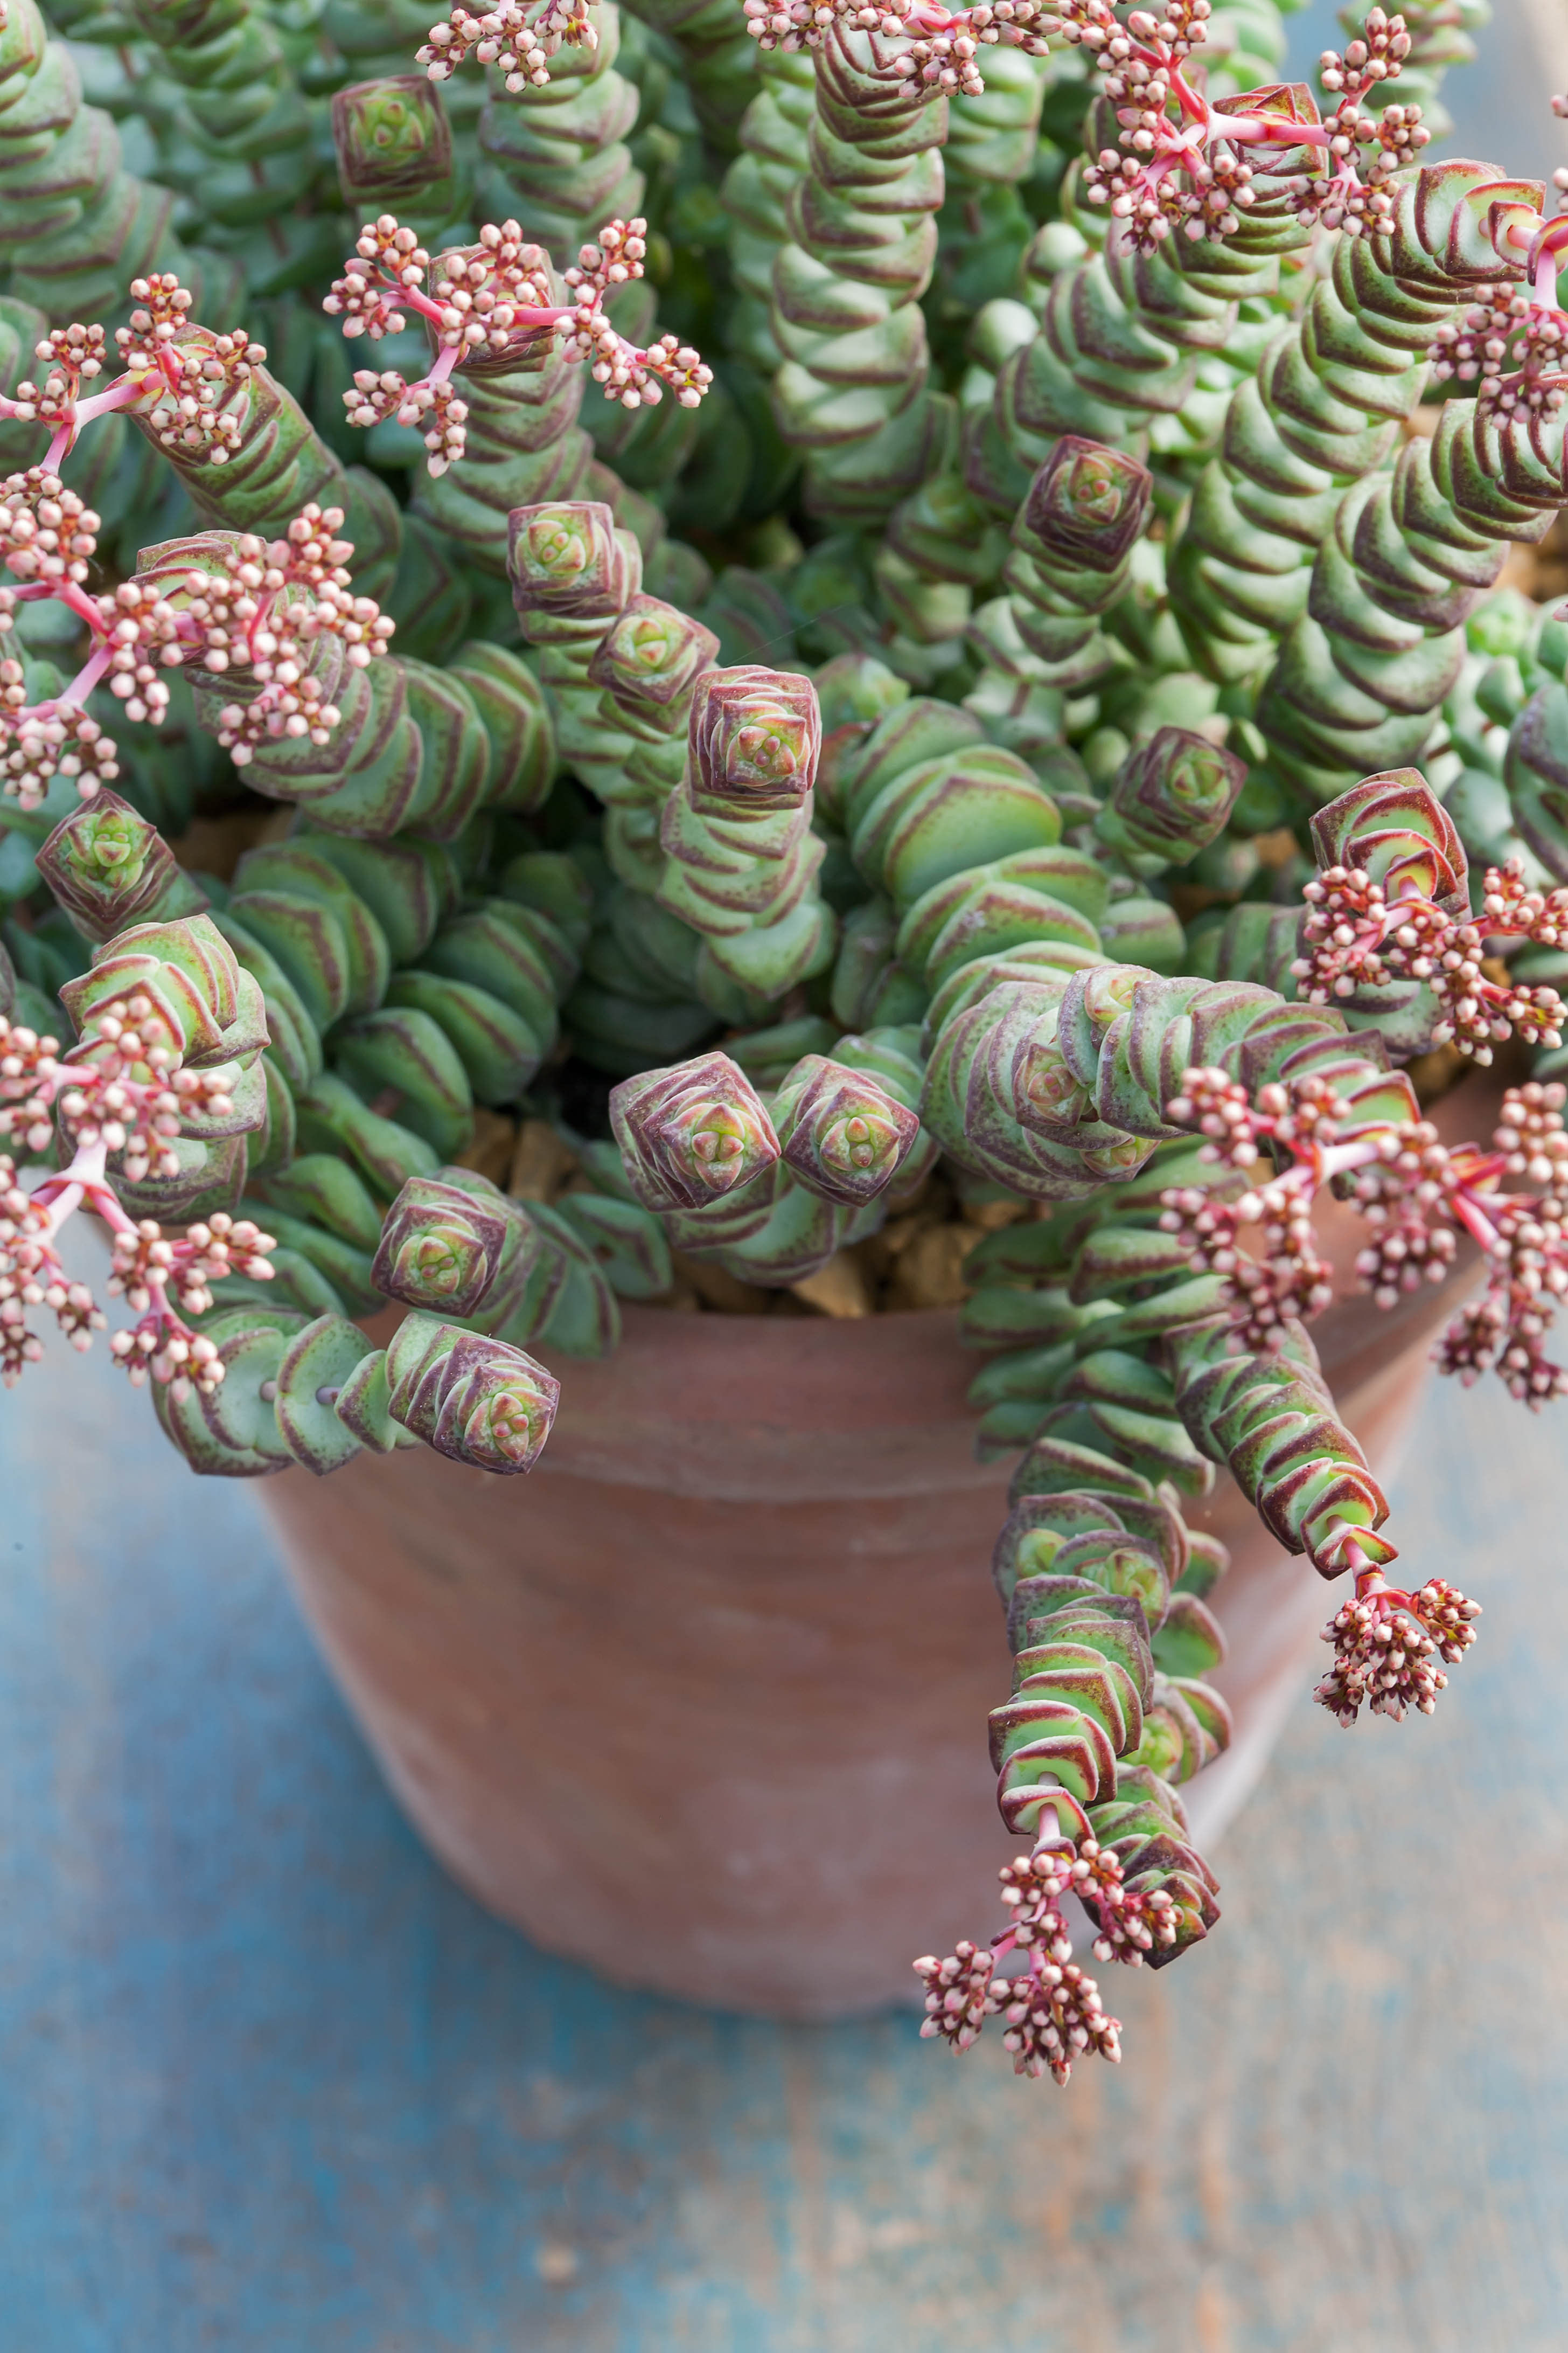 4'' Potted Crassula Baby Necklace Succulent Plant, Multi-stems - Etsy